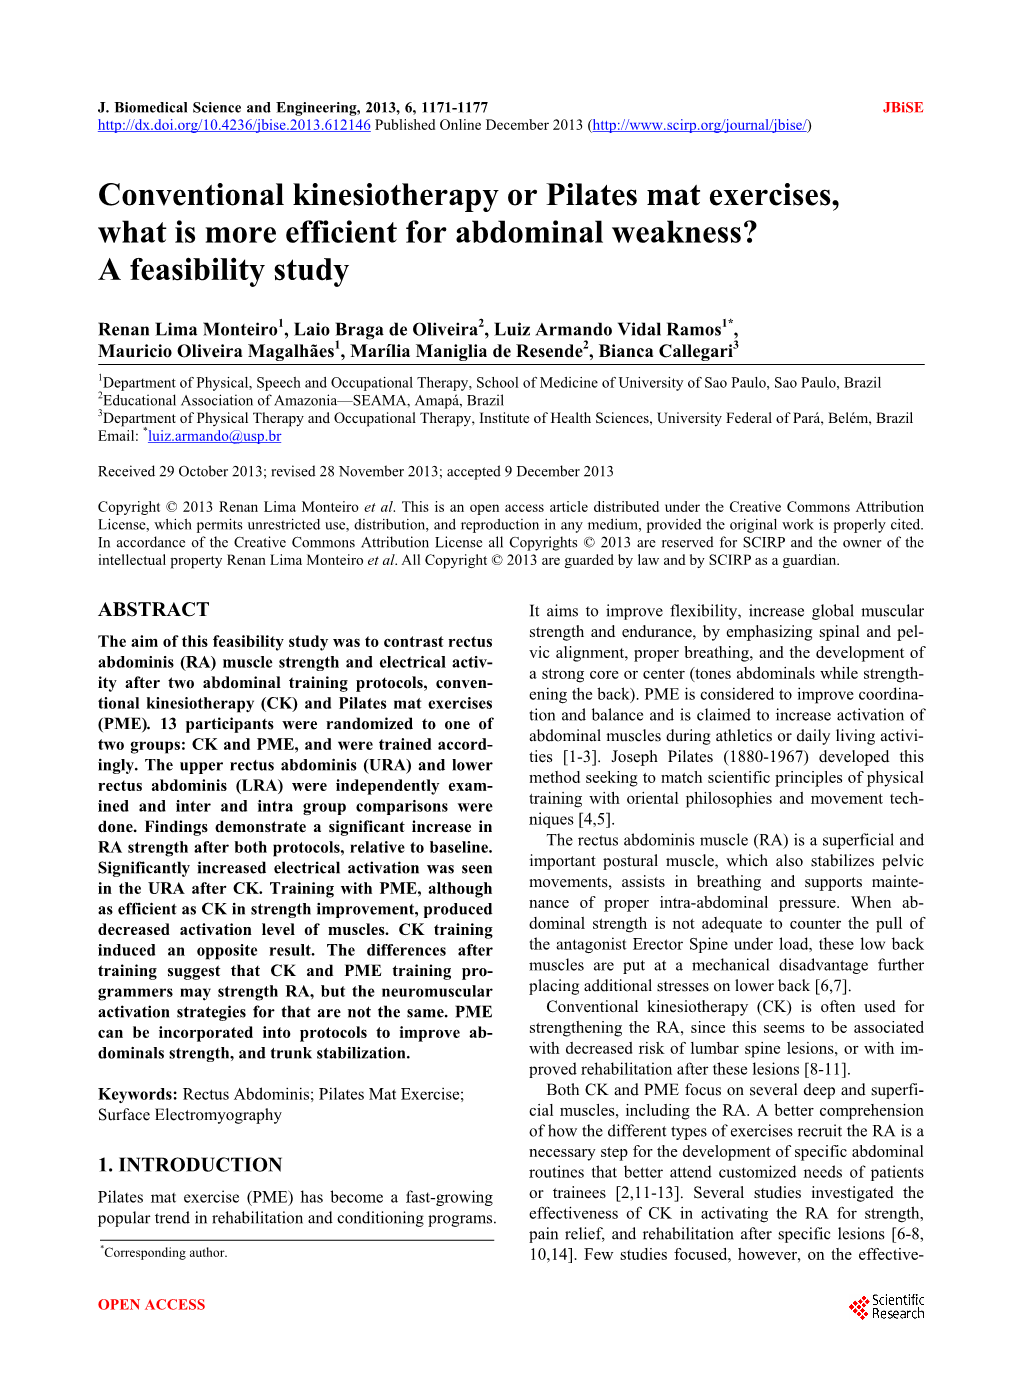 Conventional Kinesiotherapy Or Pilates Mat Exercises, What Is More Efficient for Abdominal Weakness? a Feasibility Study